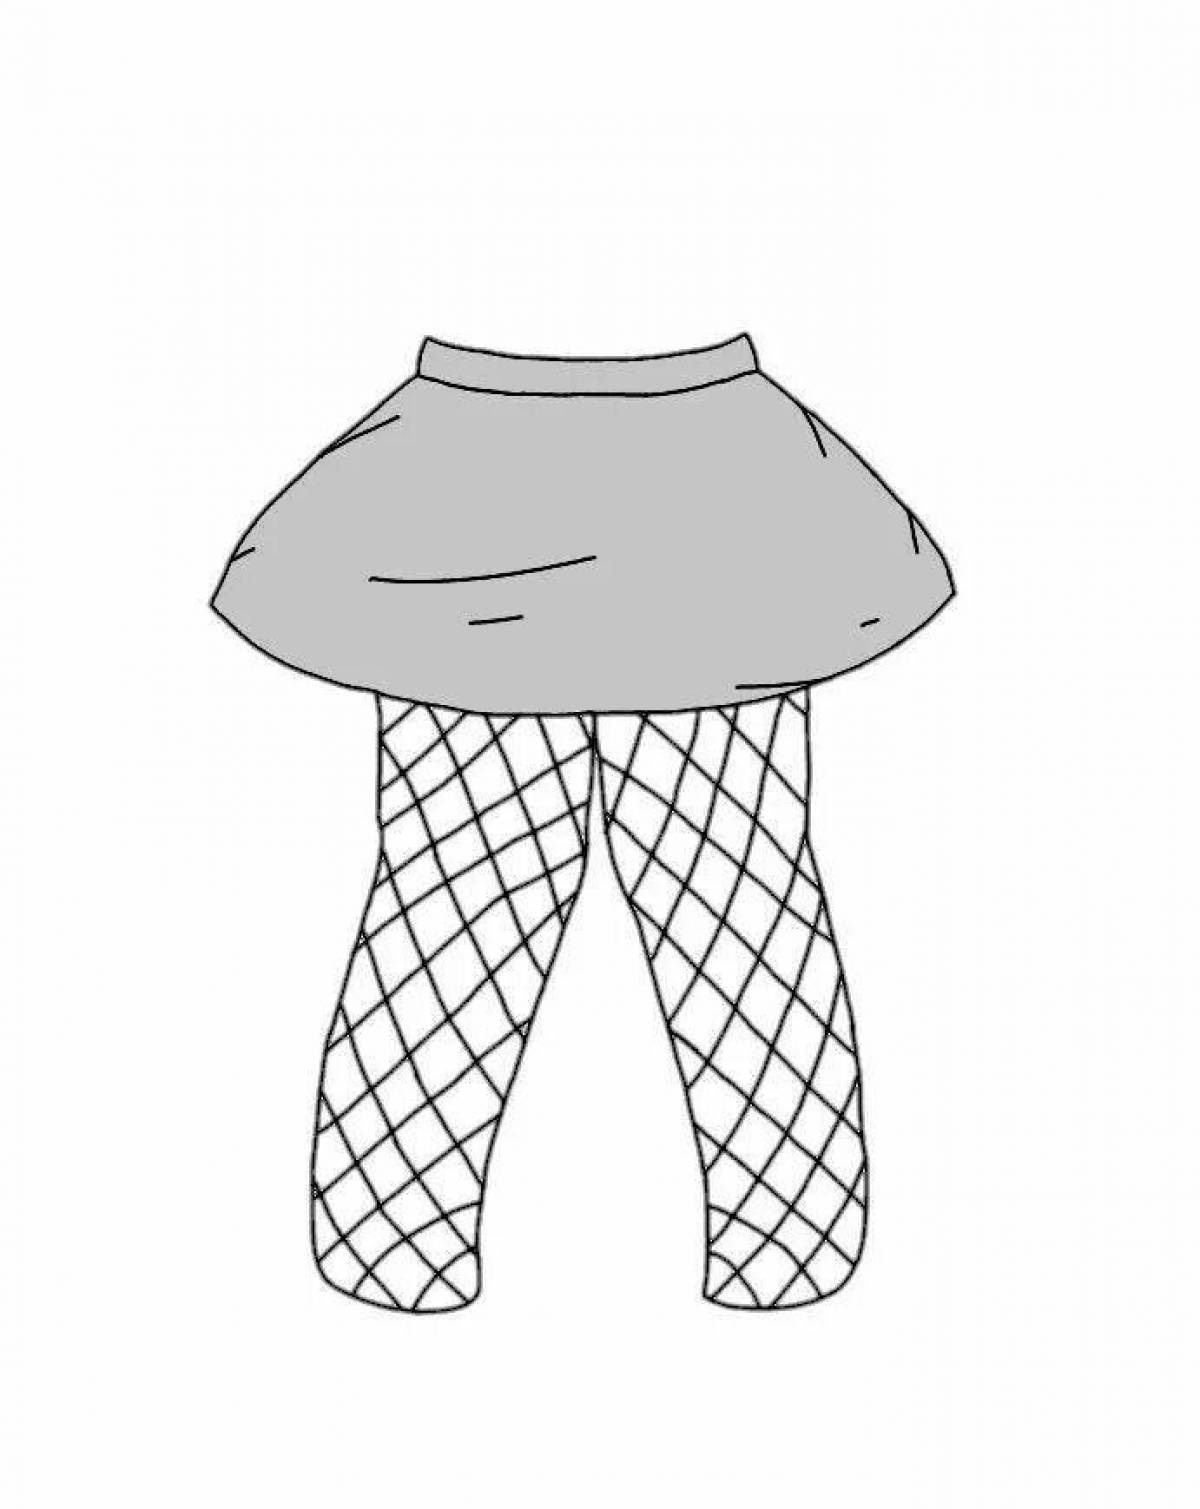 Attractive clothing gacha club coloring page